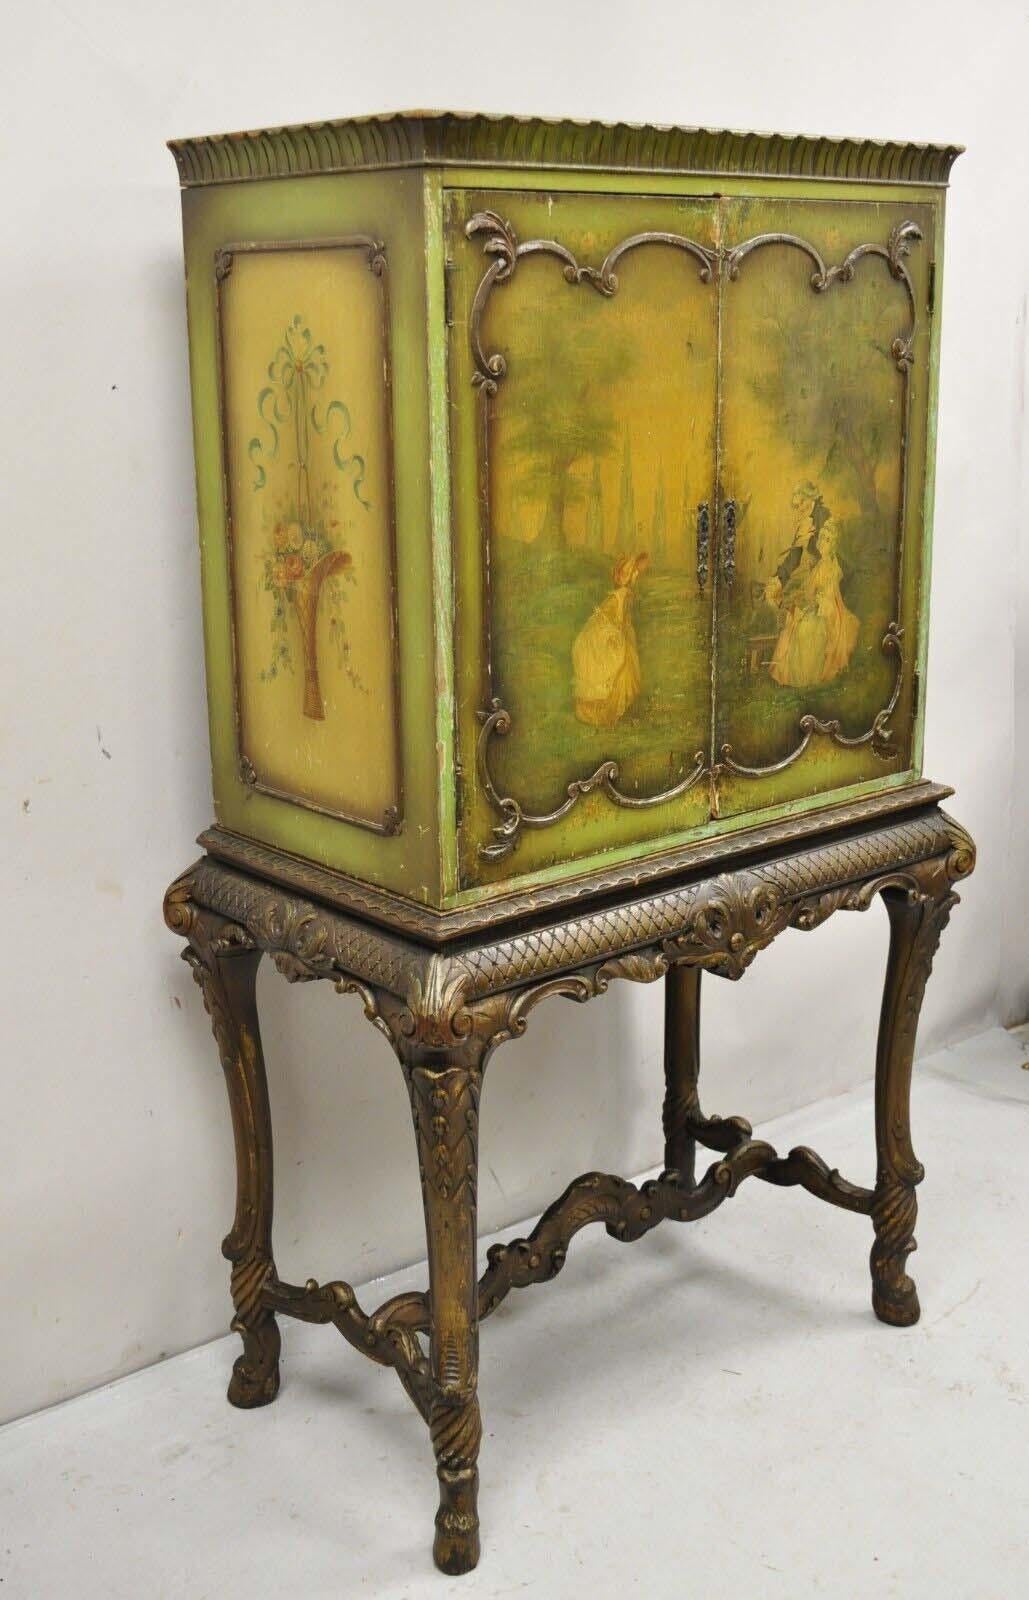 Antique French Renaissance/Baroque Green Distressed Hand Painted Radio/Bar Cabinet Cupboard. Item features a 2 part construction, carved baroque style legs, wonderful hand painted courting scene to front doors, floral painted sides, distressed